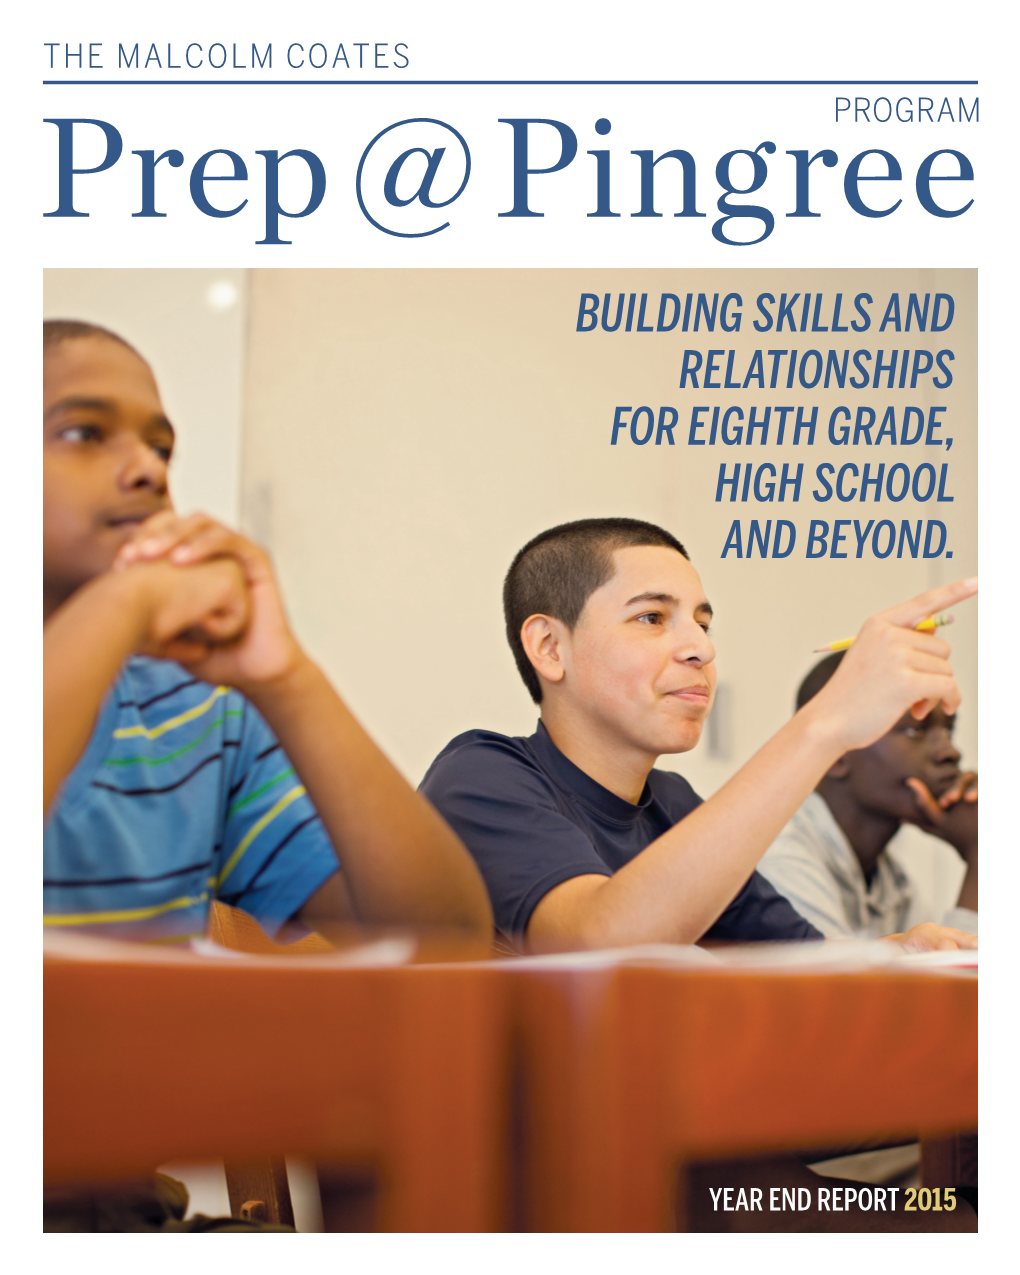 Building Skills and Relationships for Eighth Grade, High School and Beyond